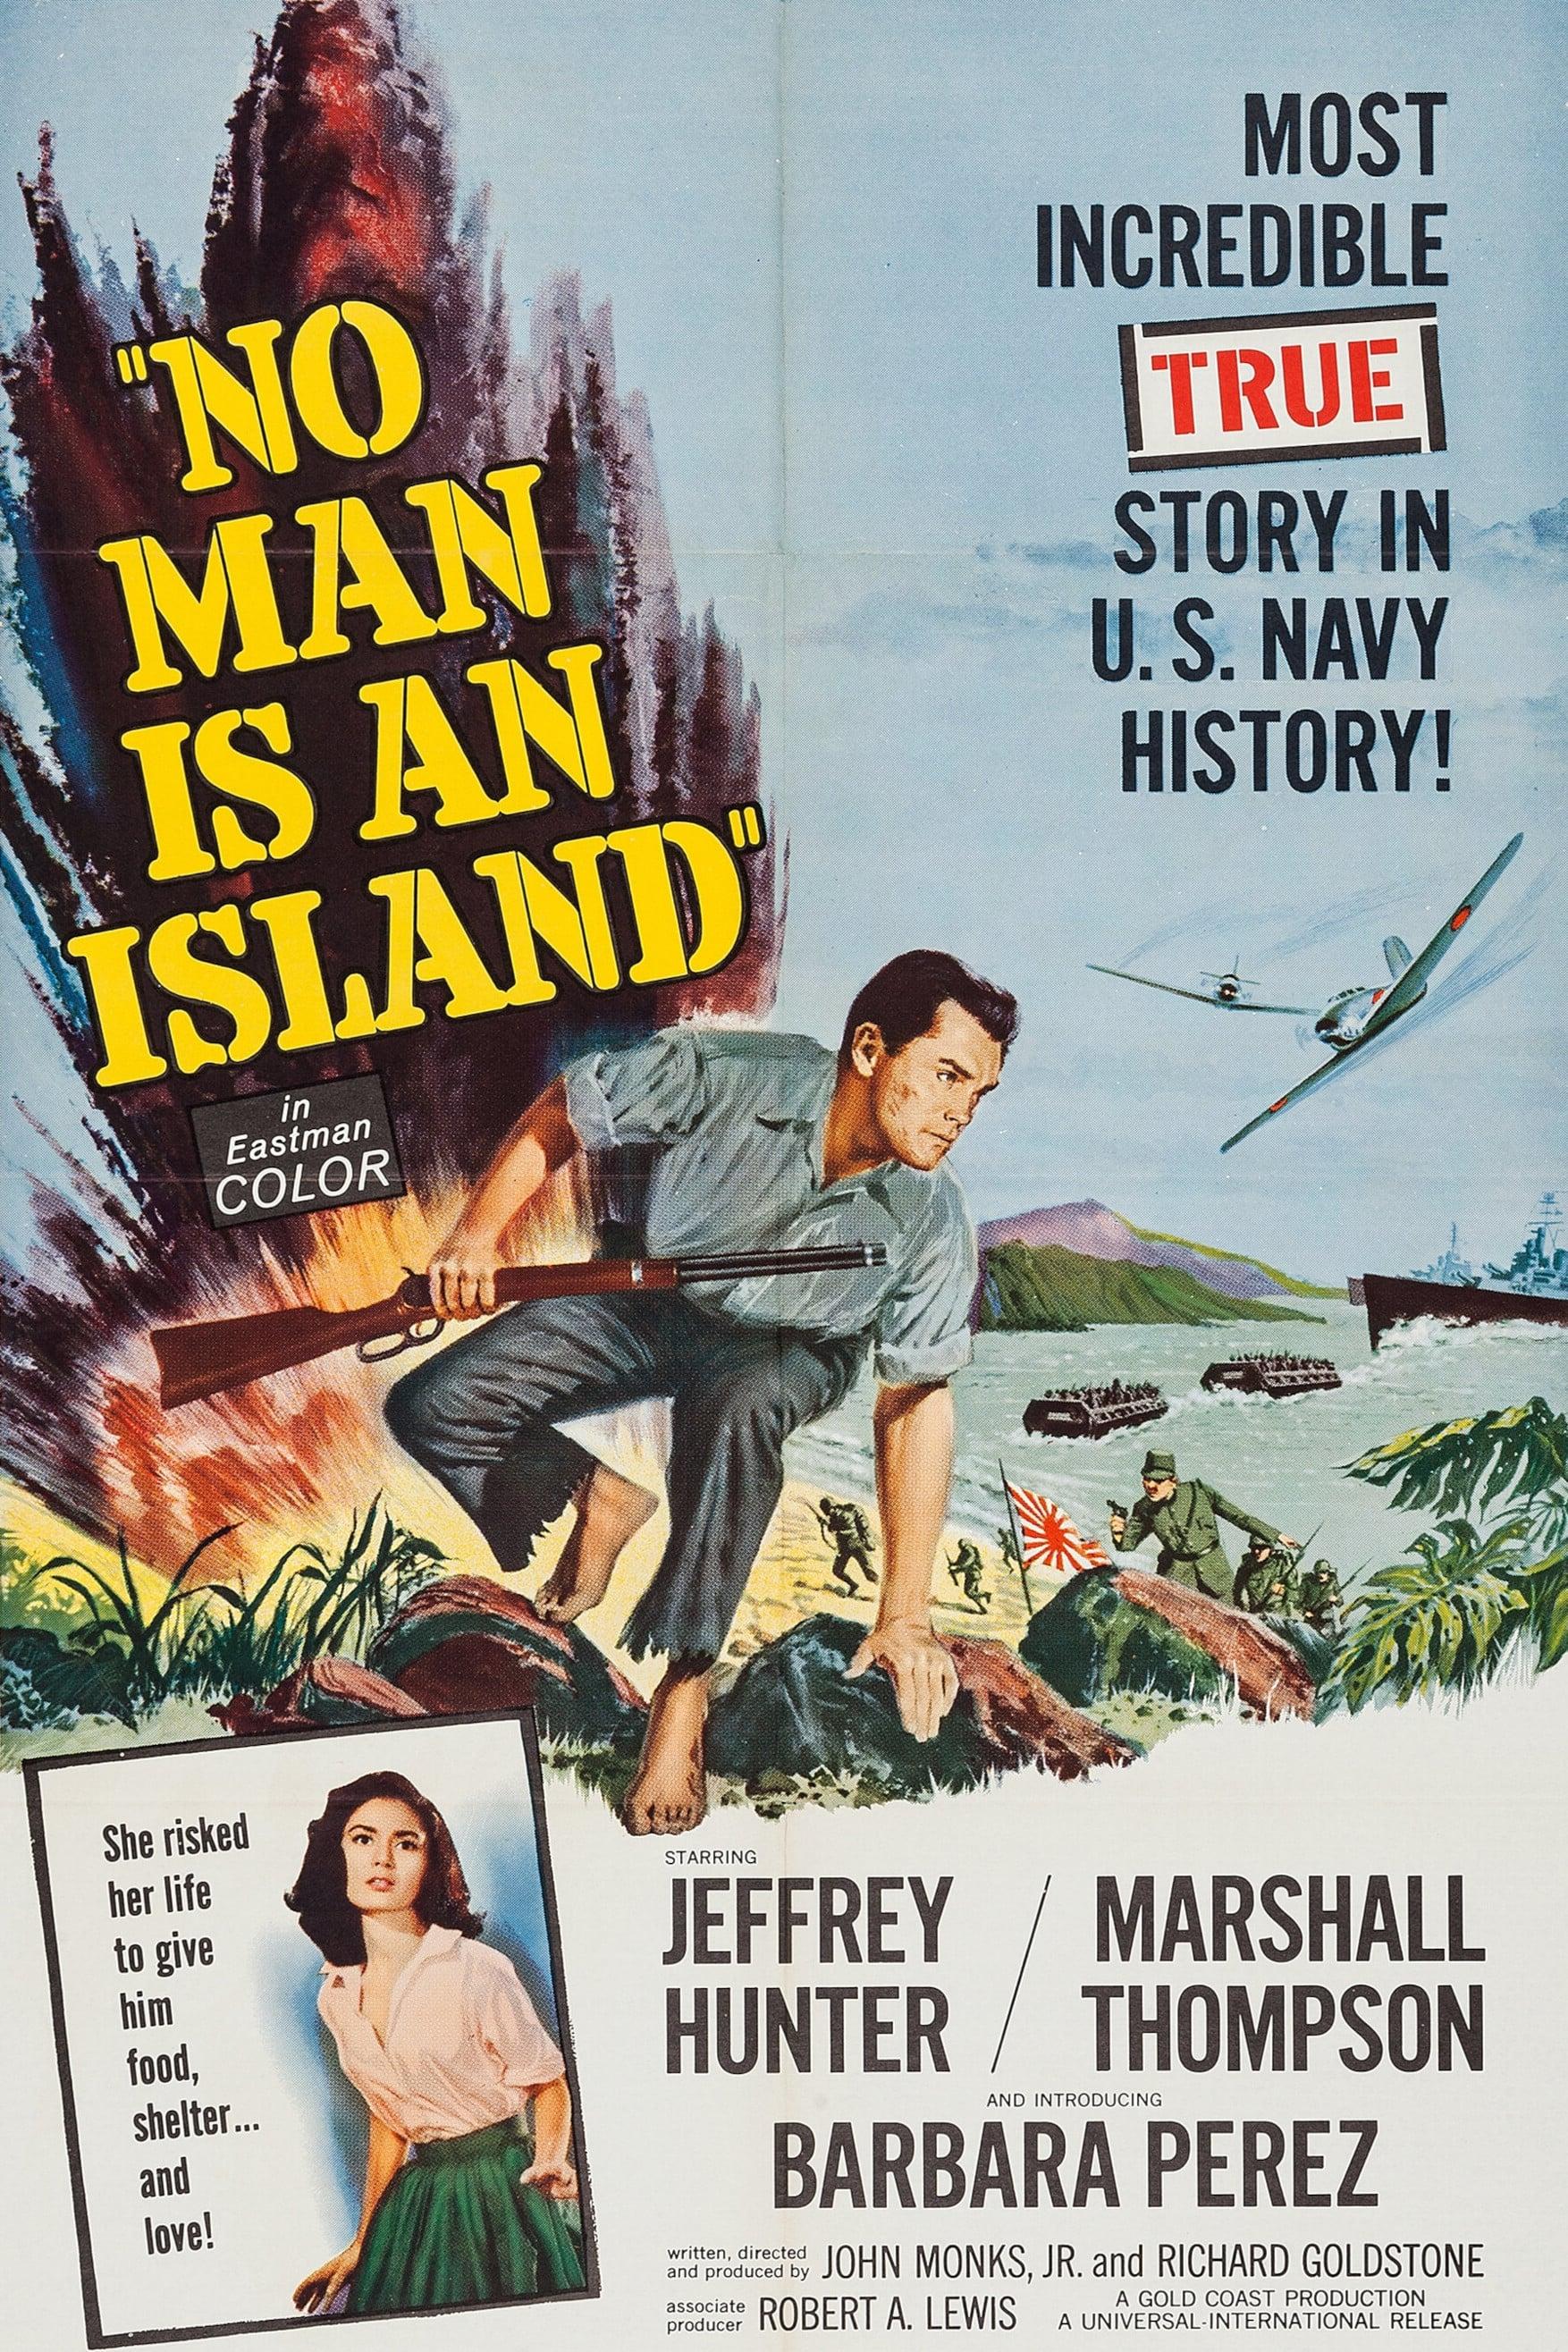 No Man Is an Island poster